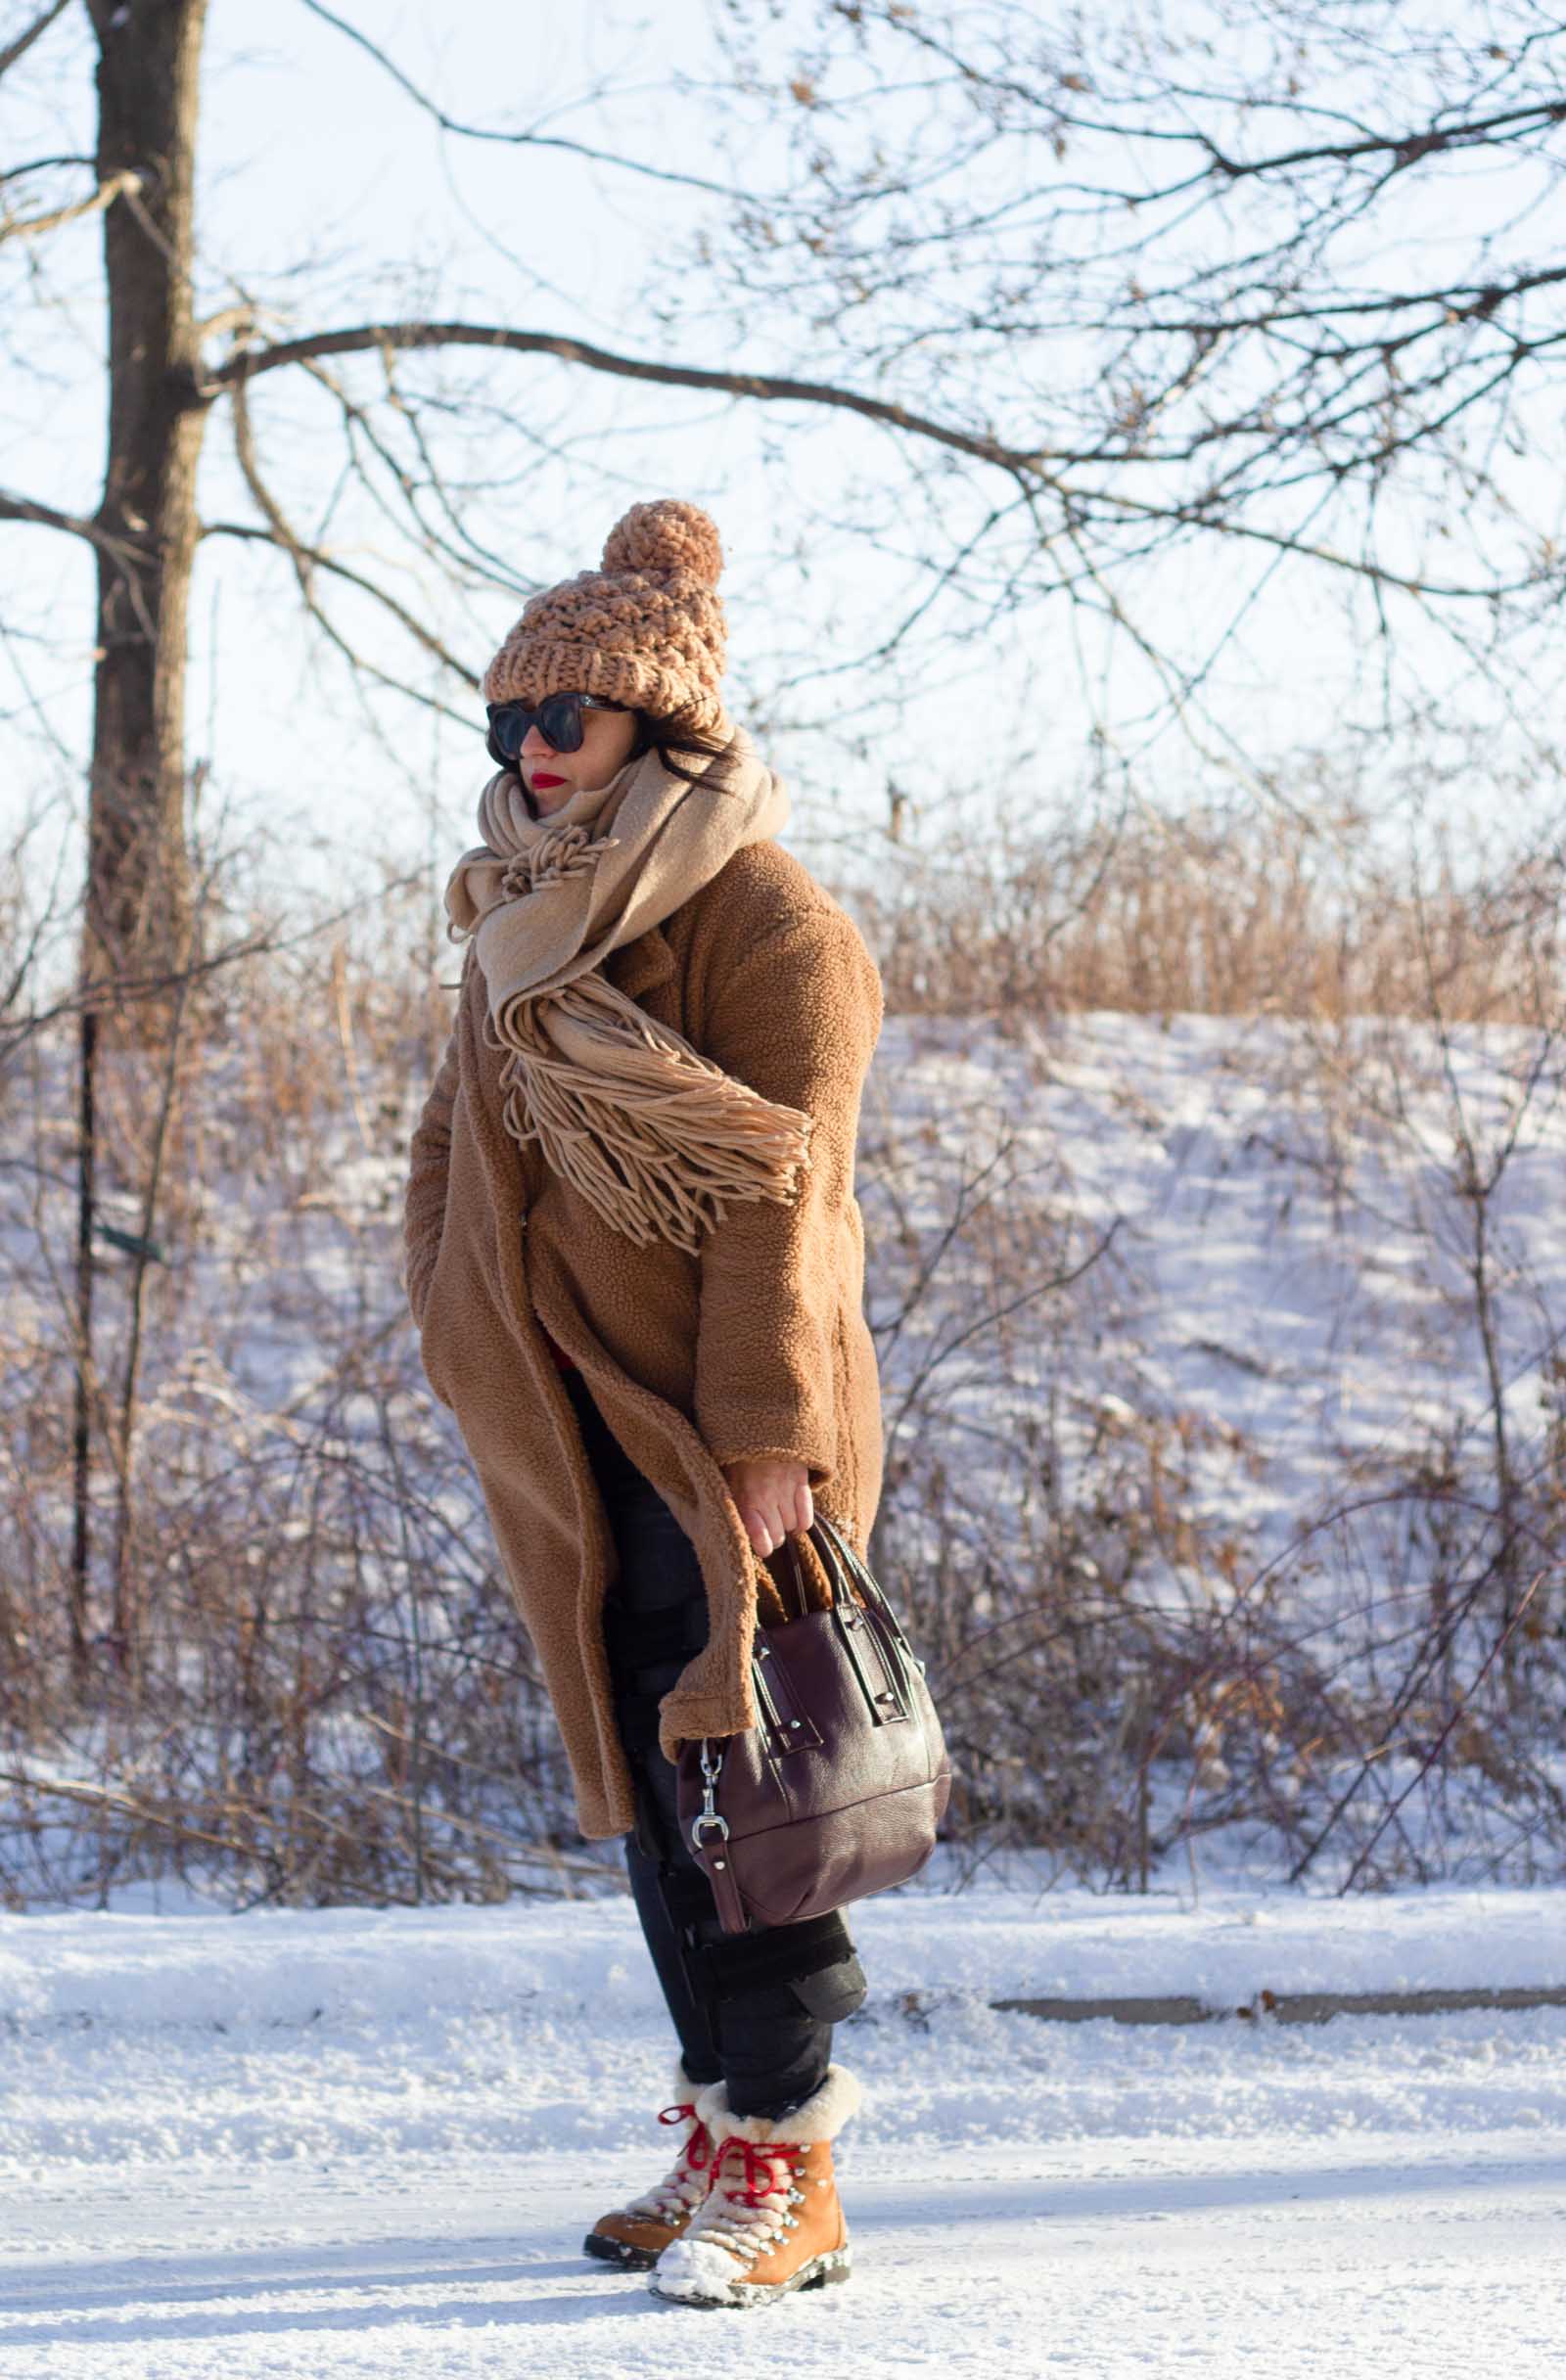 15 ways to survive a Canadian winter